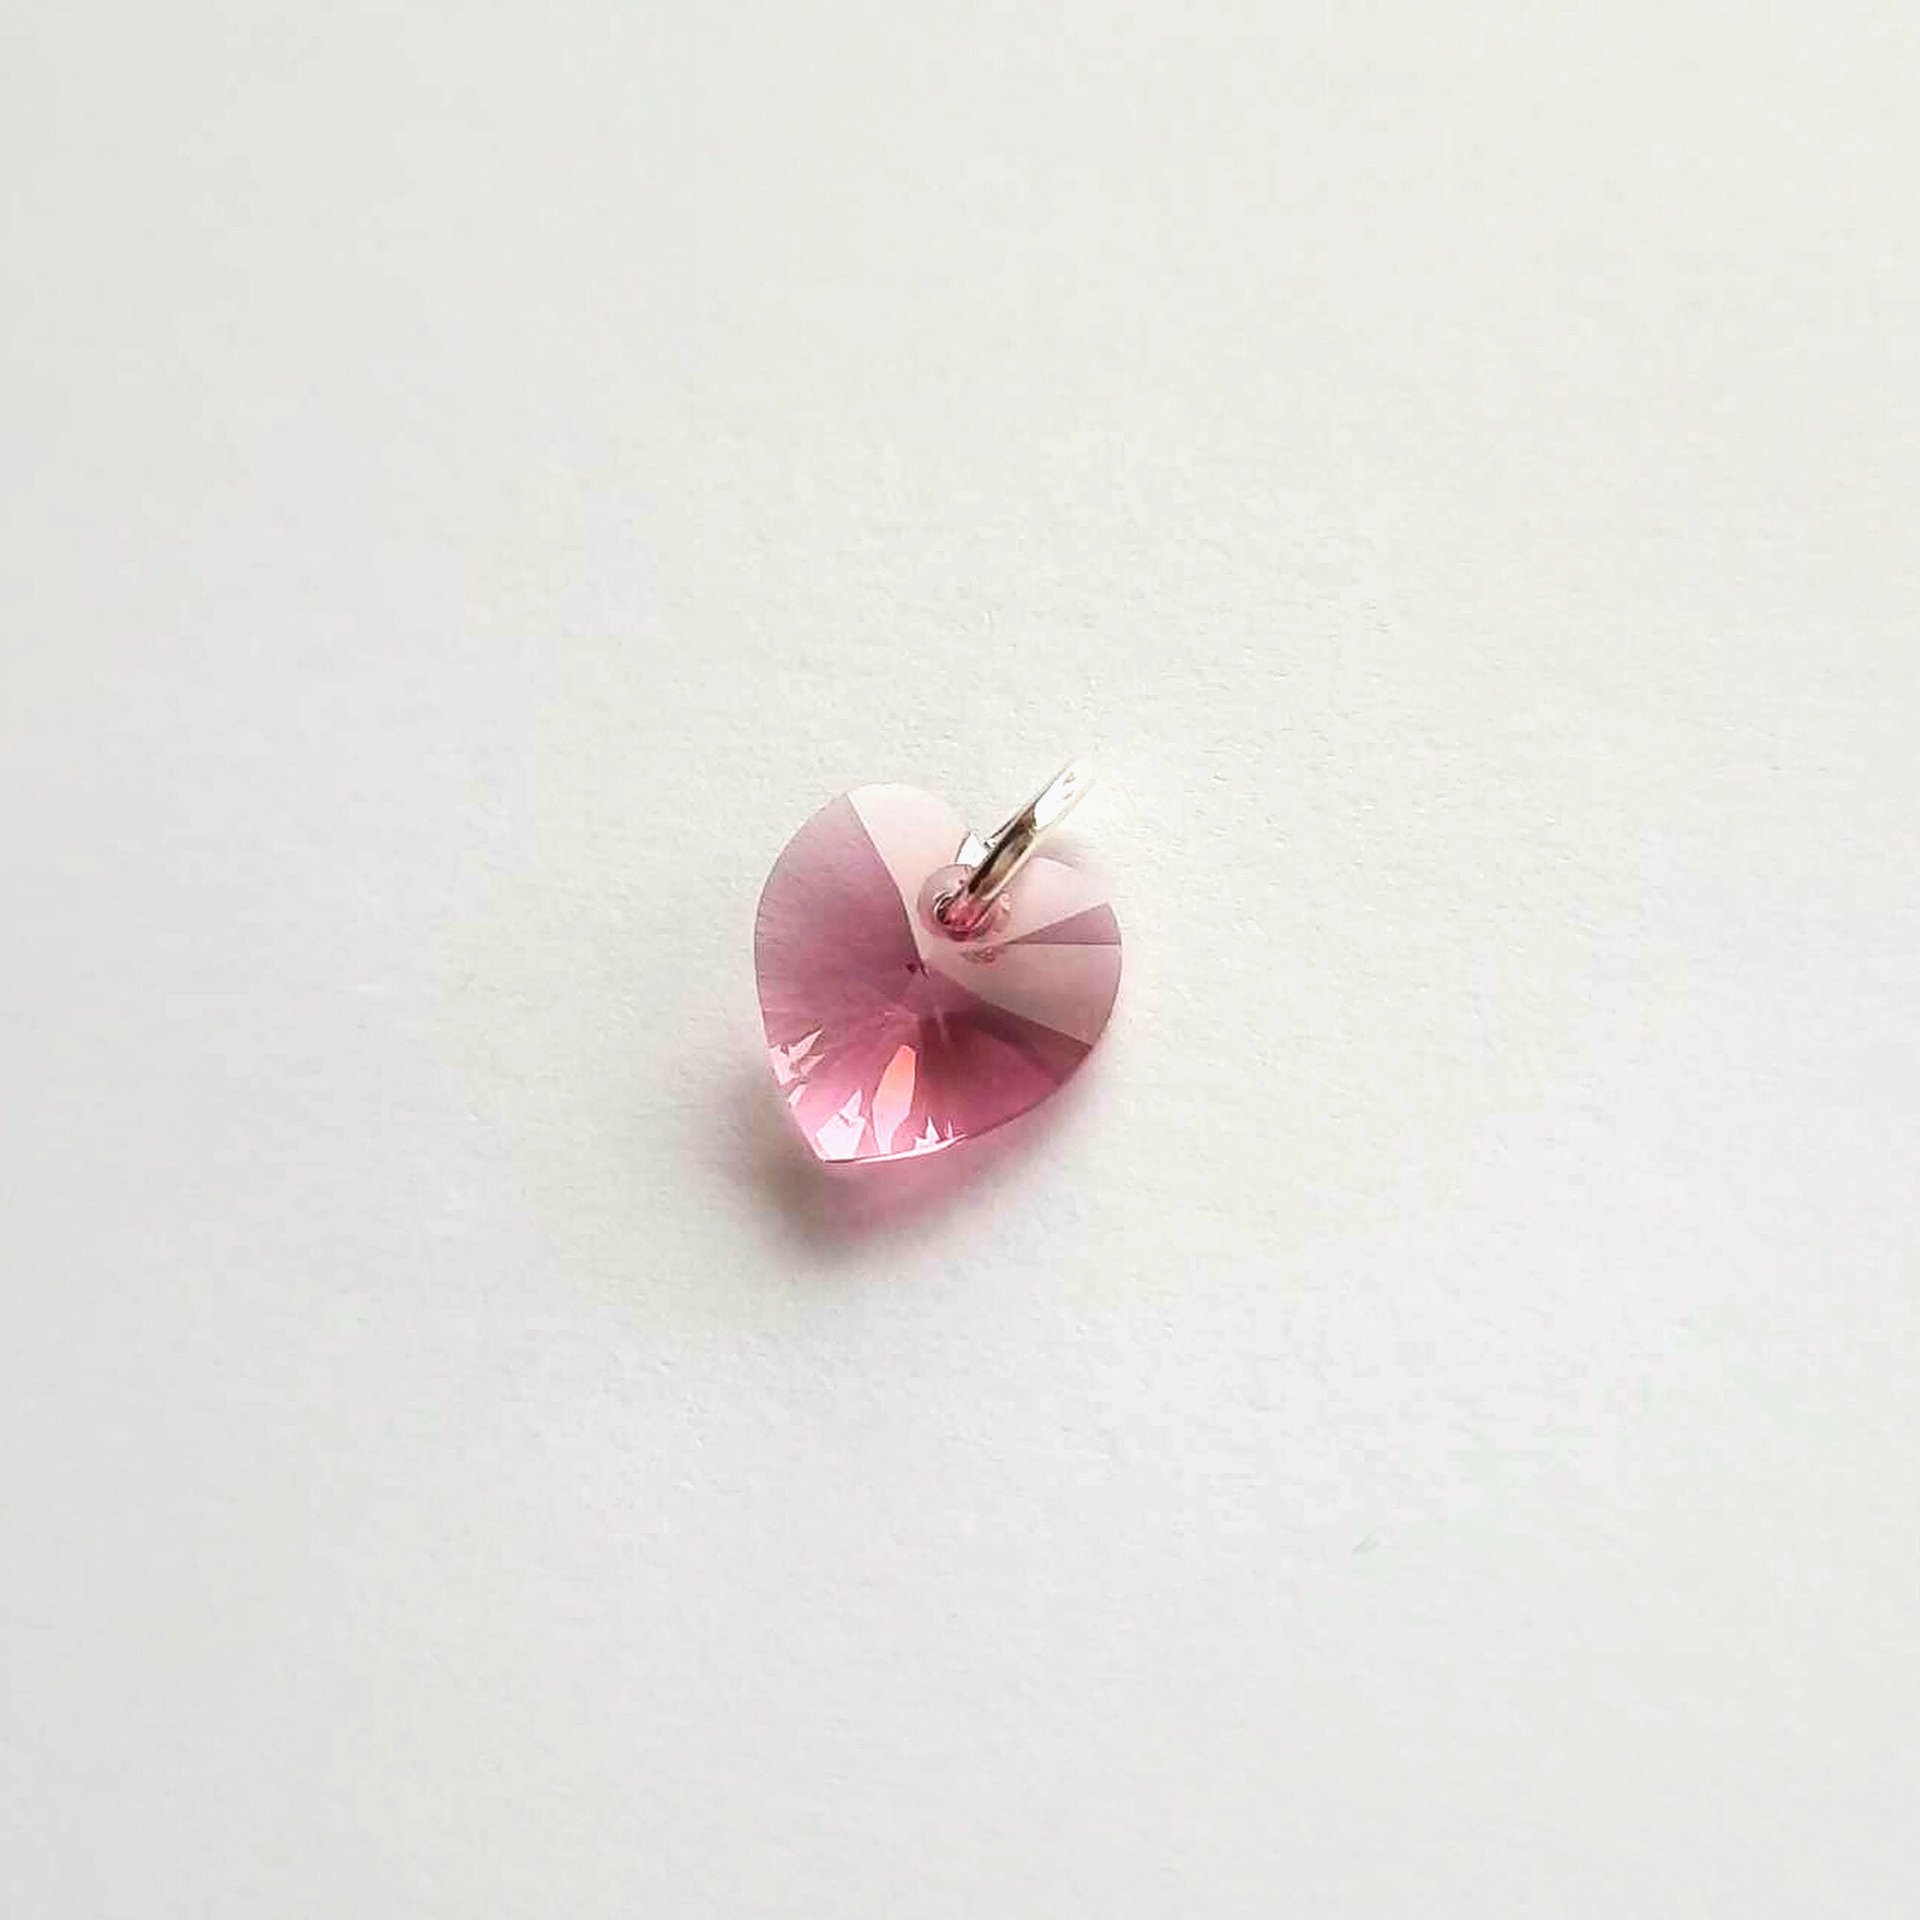 Rose Pink Crystal Heart Charm ~ Handmade by The Tiny Tree Frog Jewellery